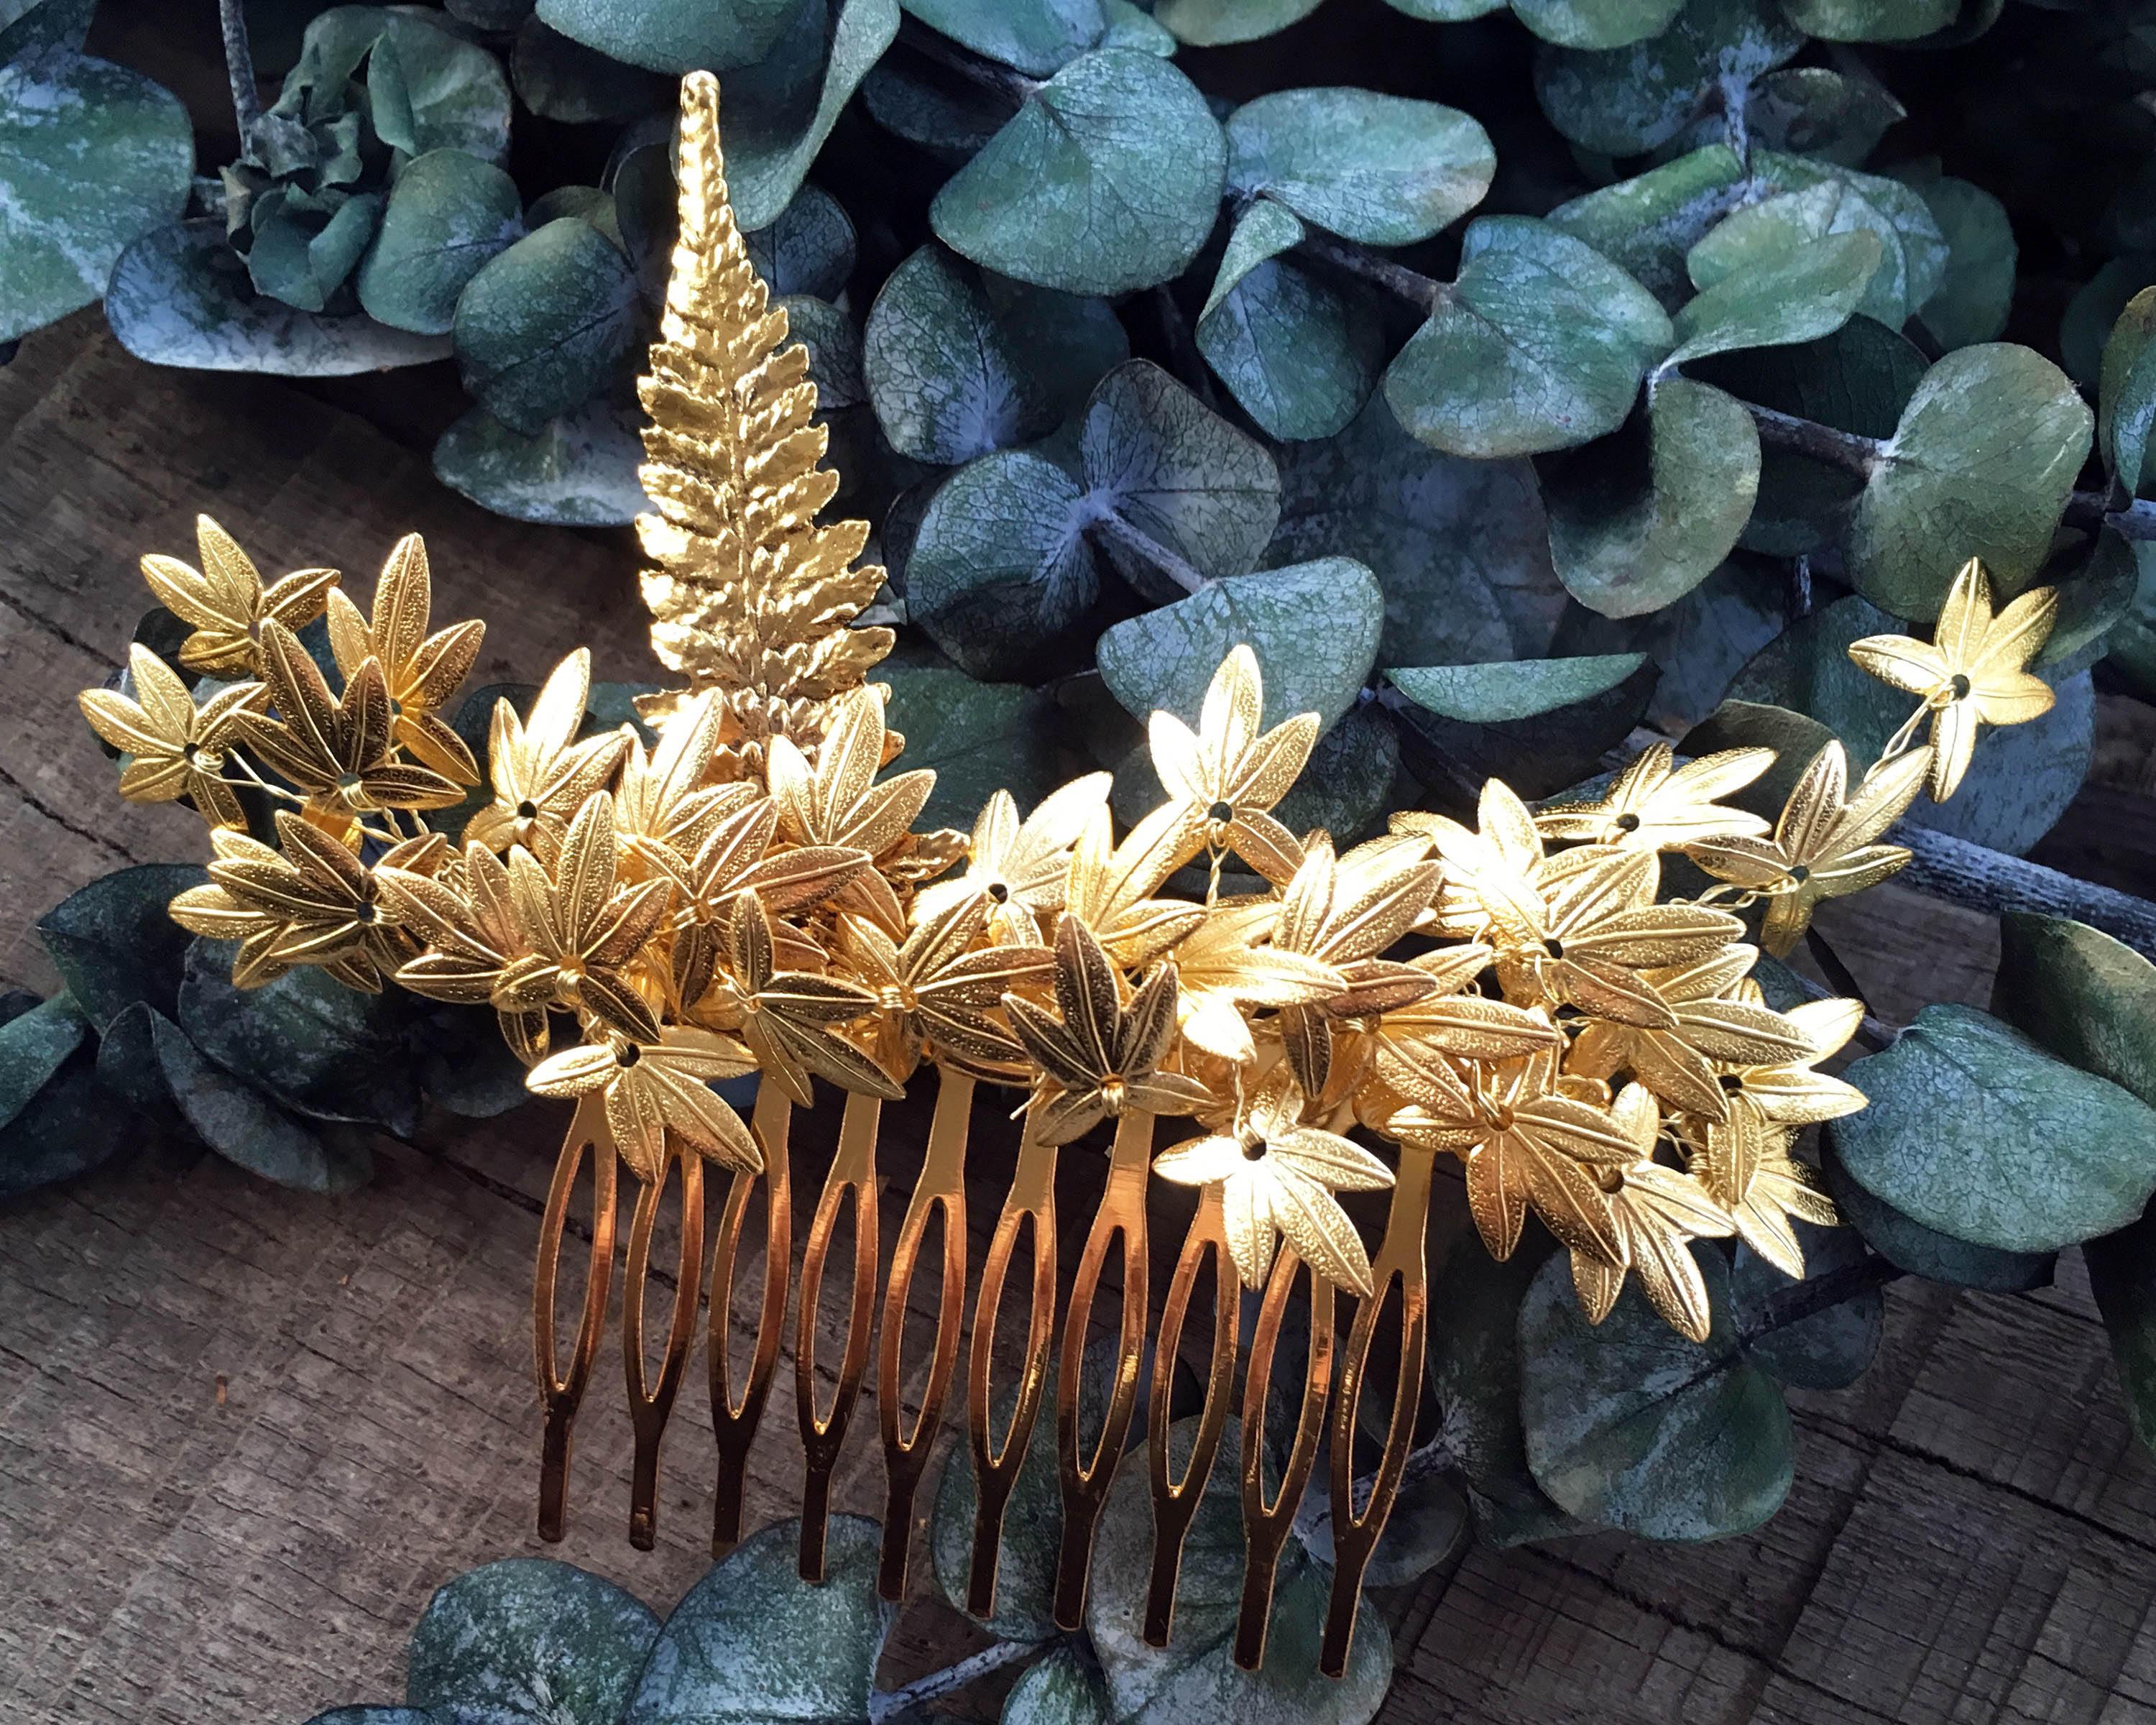 HAIR COMBS SET - BRIDAL JEWELLERY WITH LEAFS FOR THE FAIRY BRIDE © Seegang Berlin